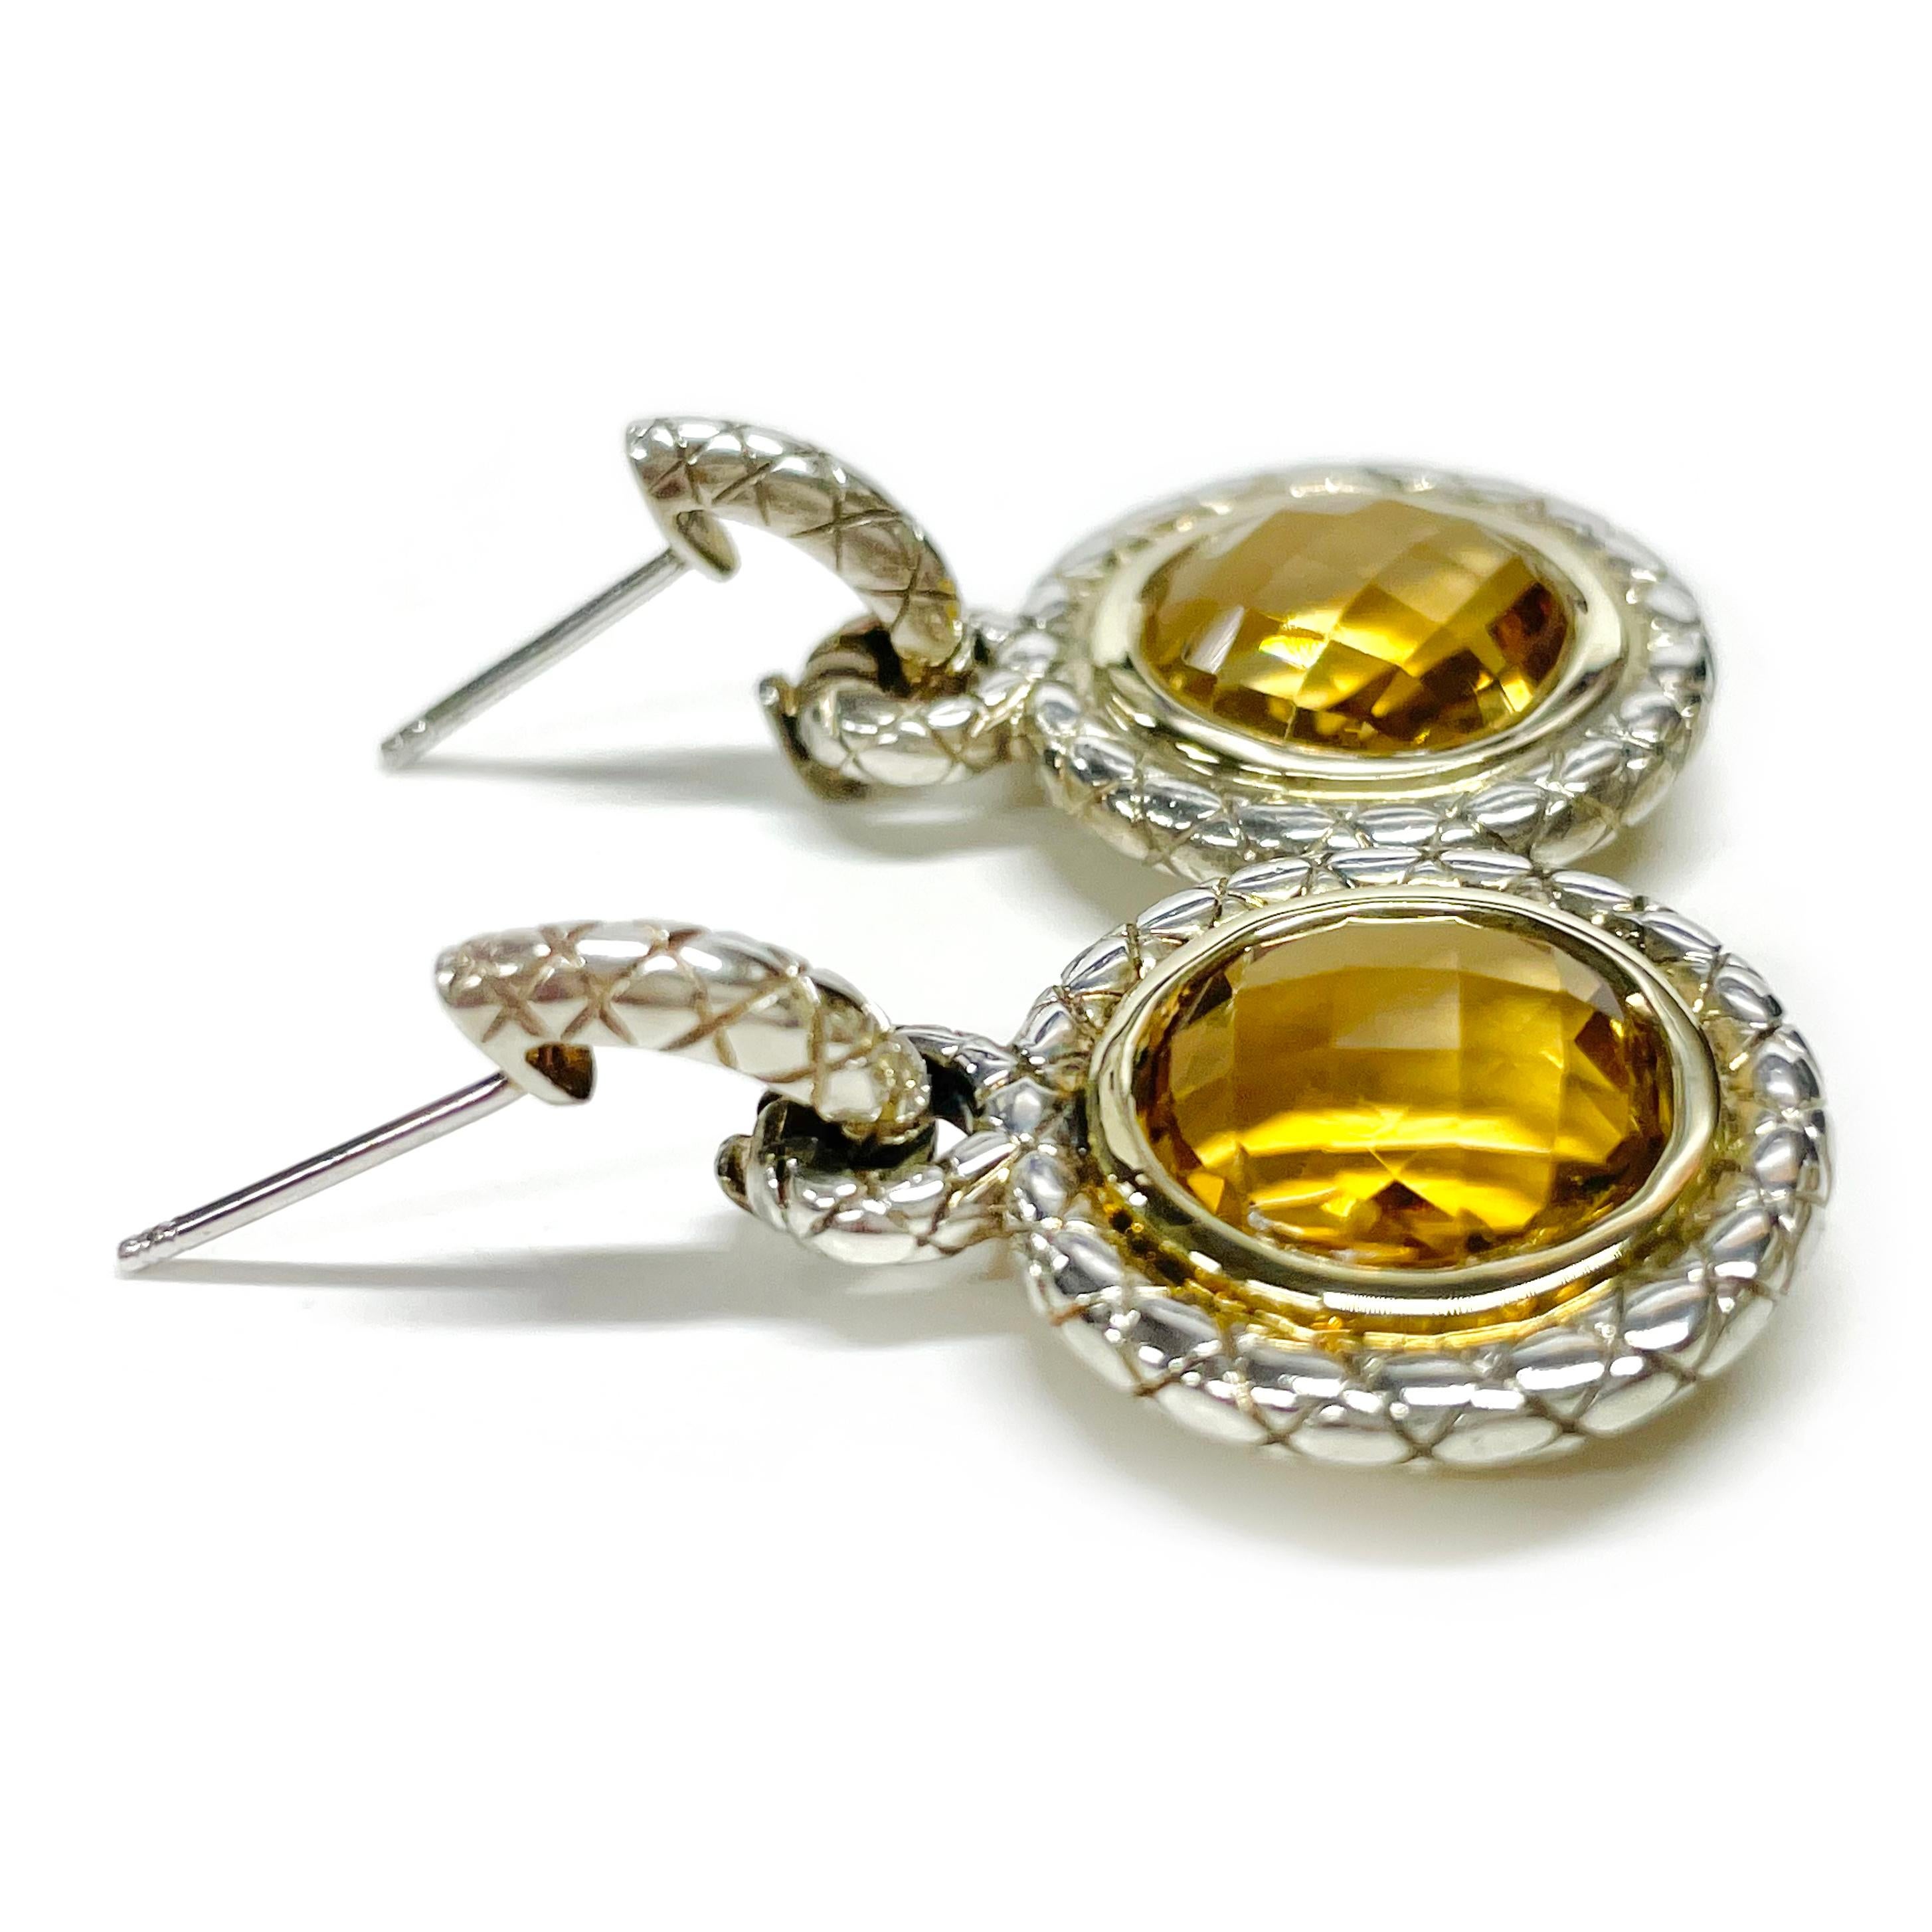 Charles Krypell Two-Tone 14 Karat Yellow Gold and Silver Dangle Citrine Earrings. The Citrine stones have a total carat weight of 11.96ct. Checkerboard-cut round Citrine stones set in a 14 karat gold bezel and a silver textured surround. These